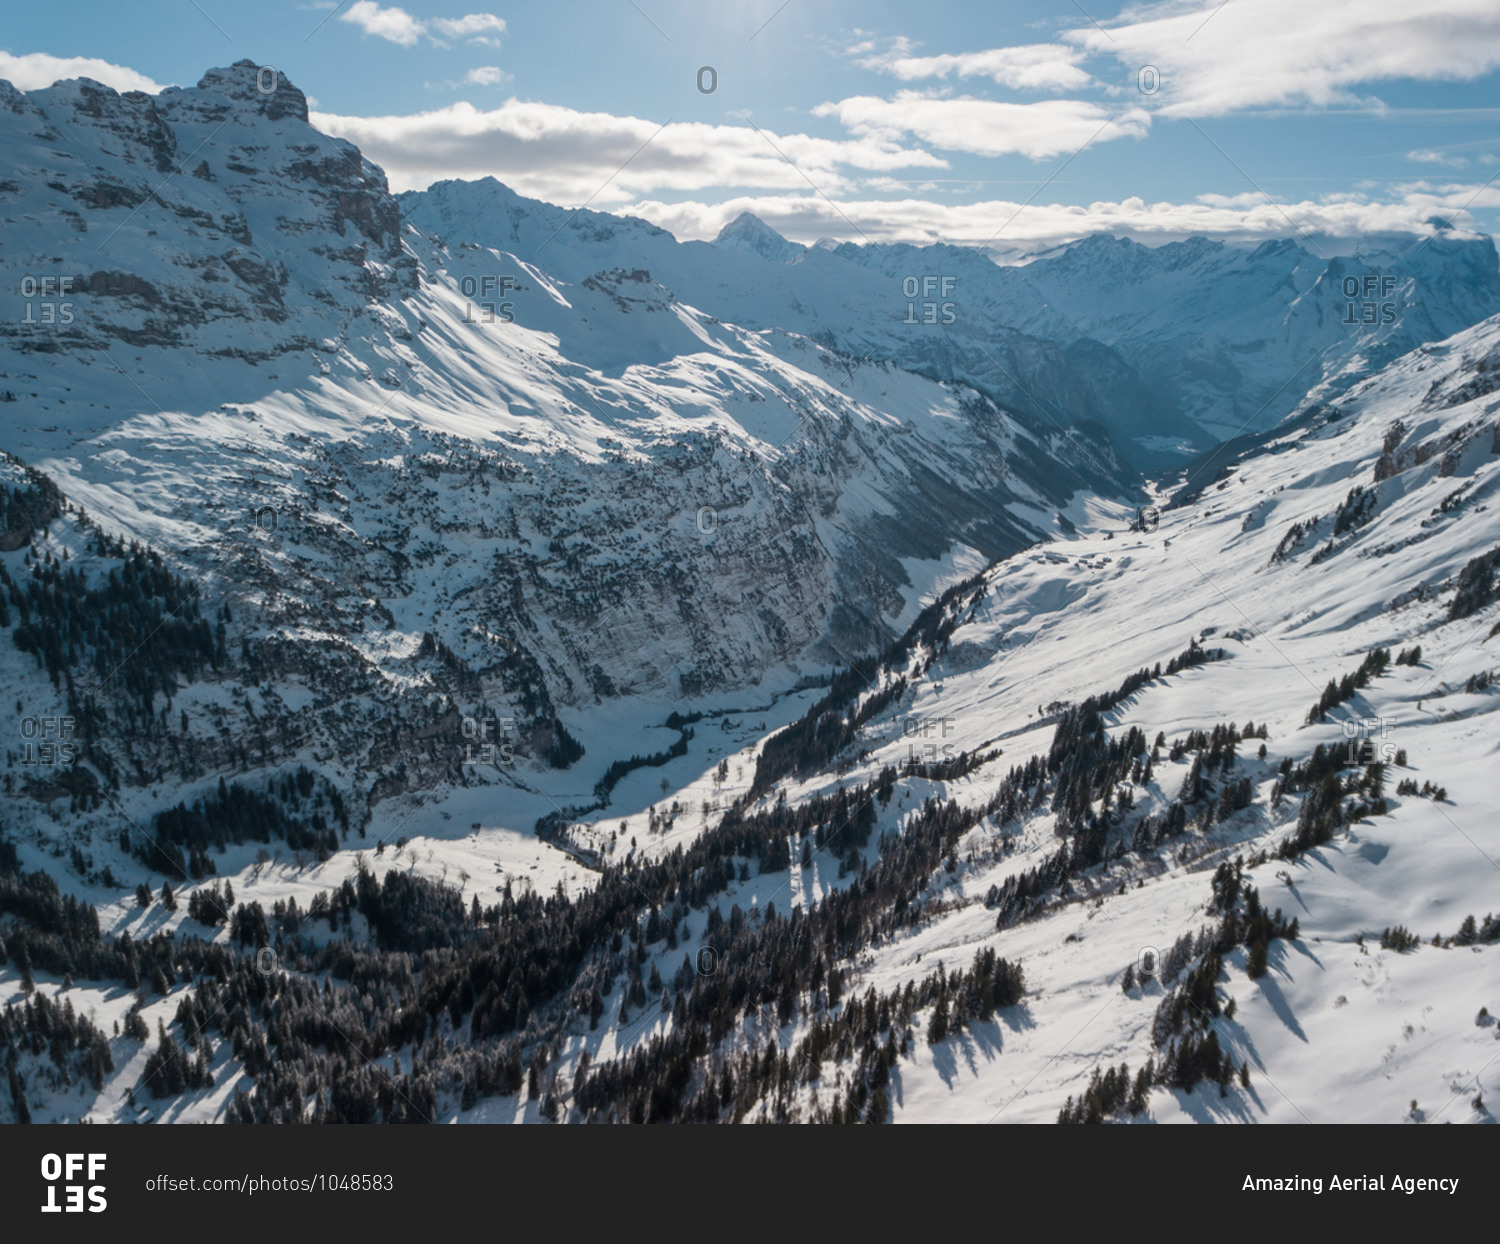 Aerial View of Snowy Mountains and Snow Covered Valley in the Bernese Alps, Switzerland